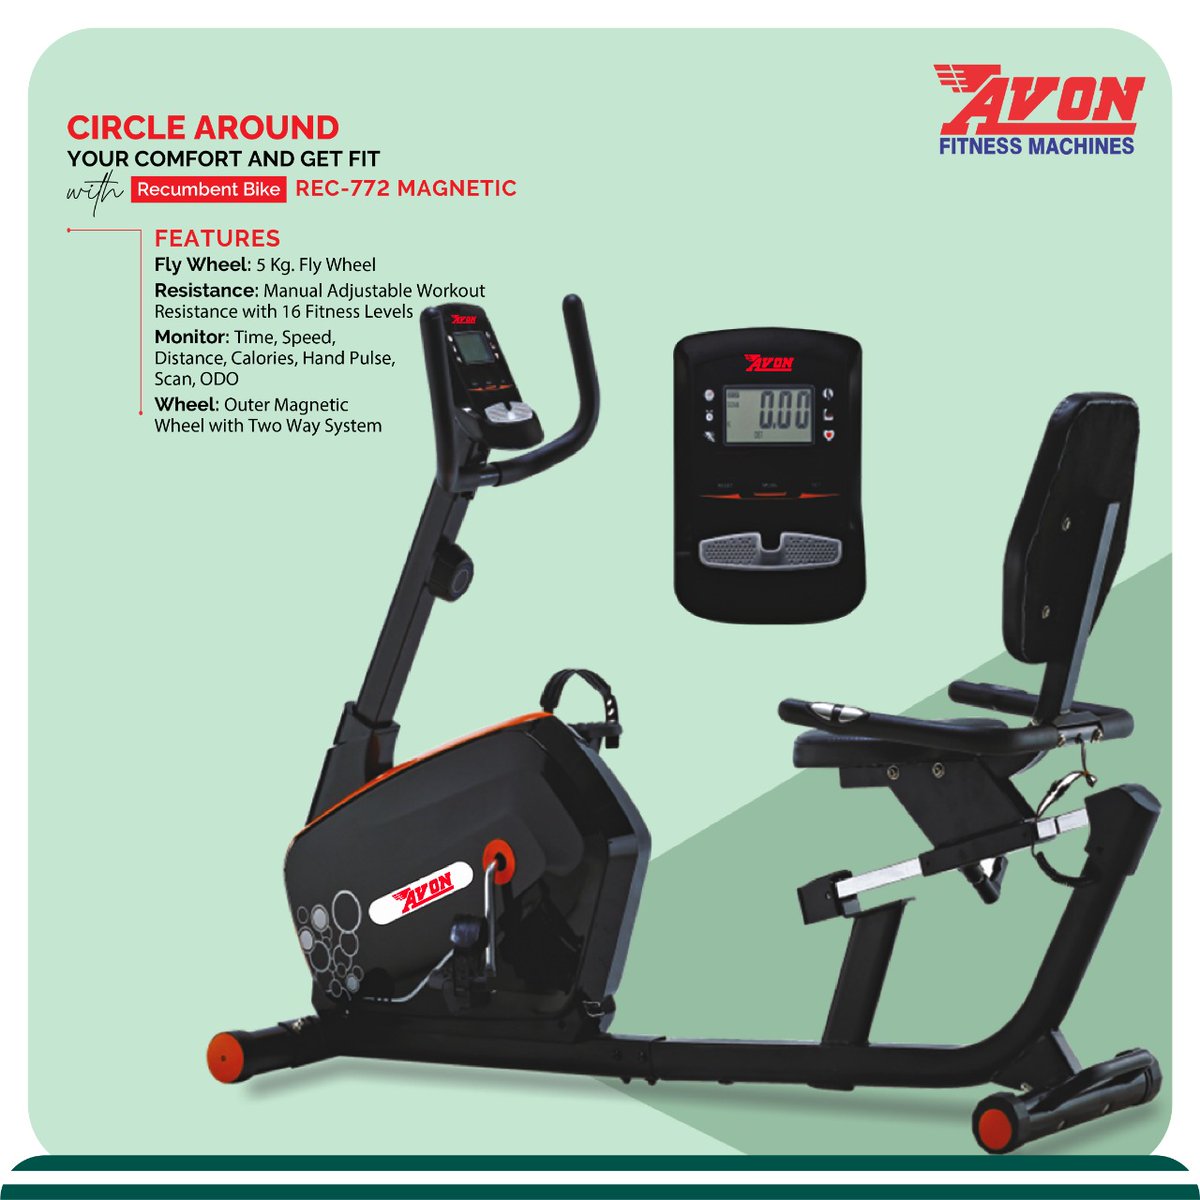 When it comes to your health, the only one responsible is you. Make the right choice with AVON Fitness.
#YourFitnesssPartner #recumbent #recumbentbike #excercising  #crosstrainerworkout  #workoutmotivation #workoutspecialist #workoutroutine #fitnessinfluencer #fitnessismylife